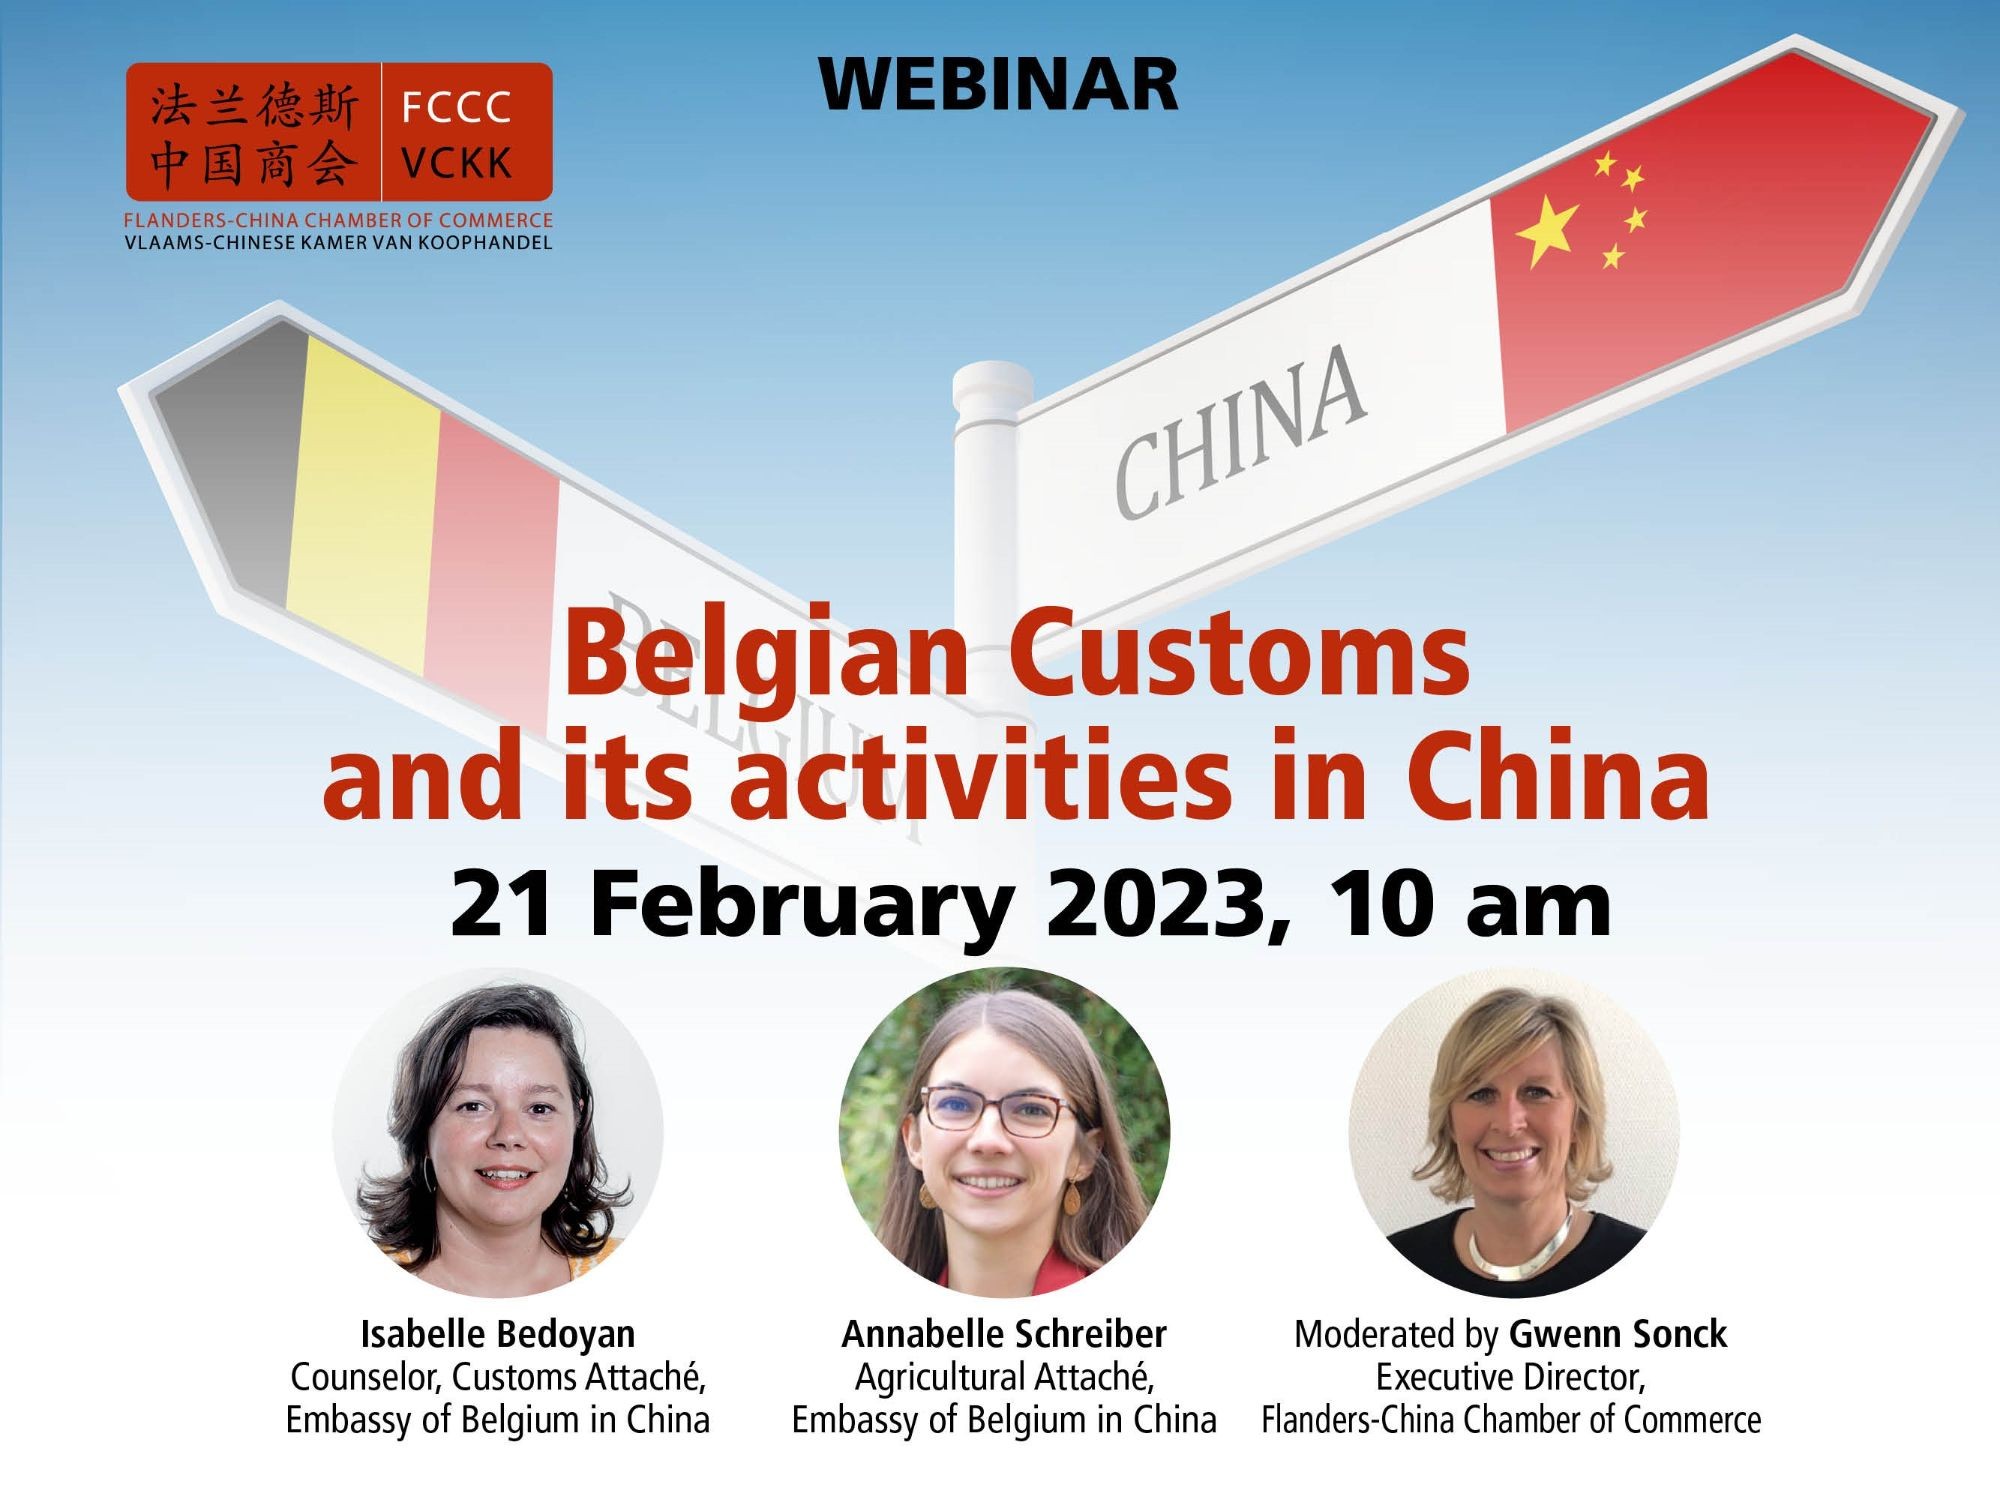 Webinar: 'Belgian Customs and its activities in China' - 21 February 2023 - 10 am CET